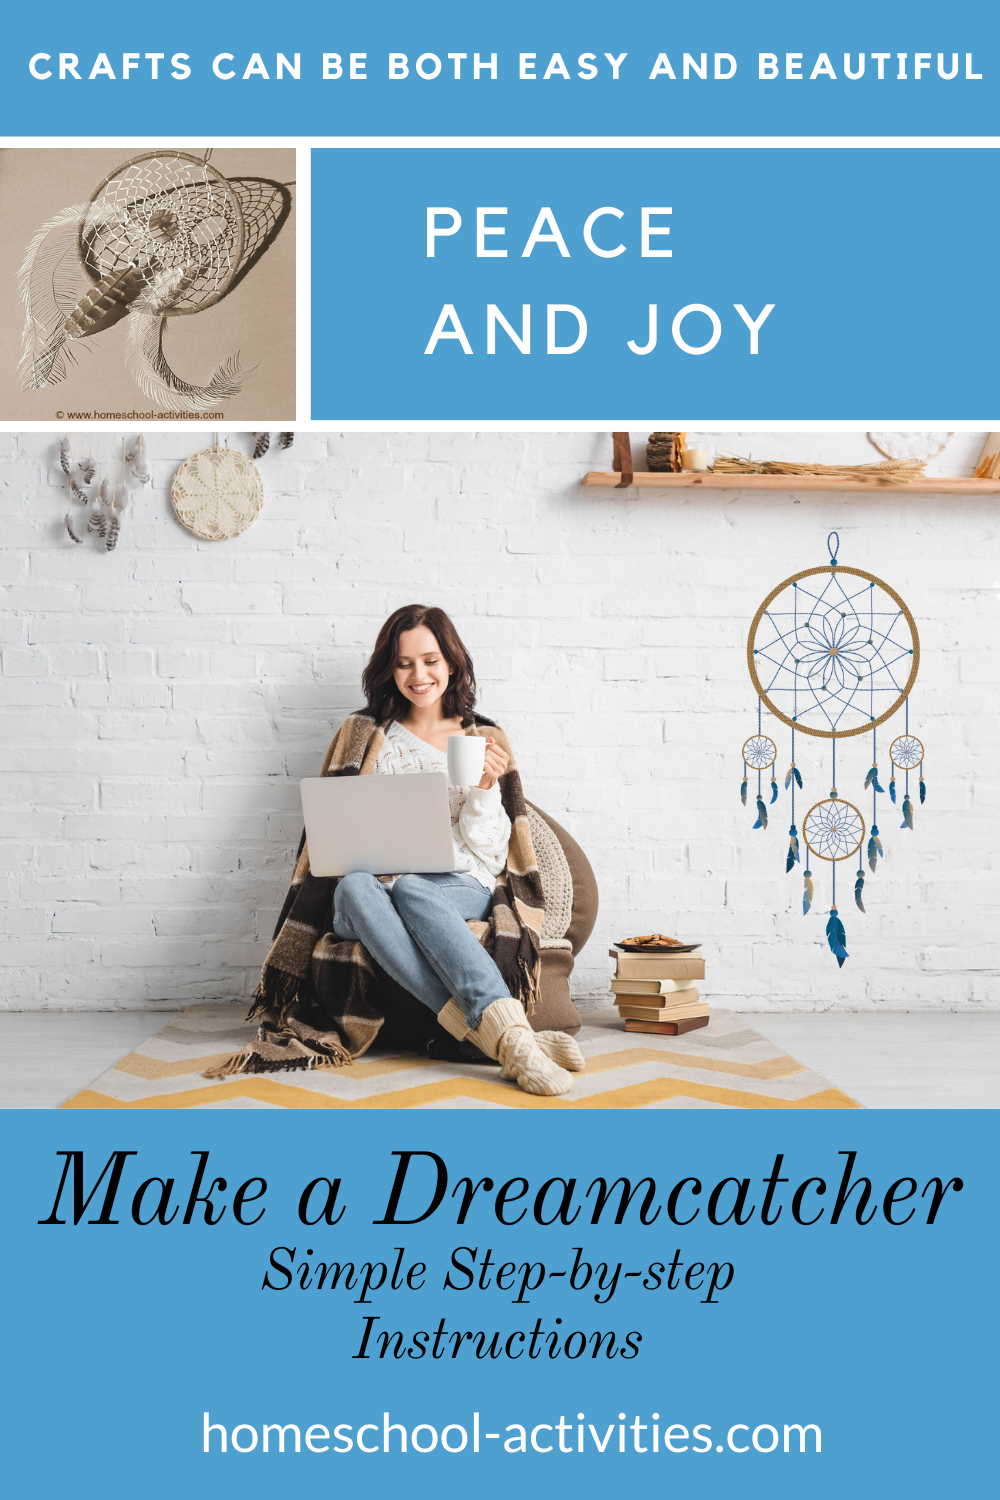 Make a Dreamcatcher step-by-step simple instructions showing you how to make a magical diy dreamcatcher with wool or sinew, cane and feathers.